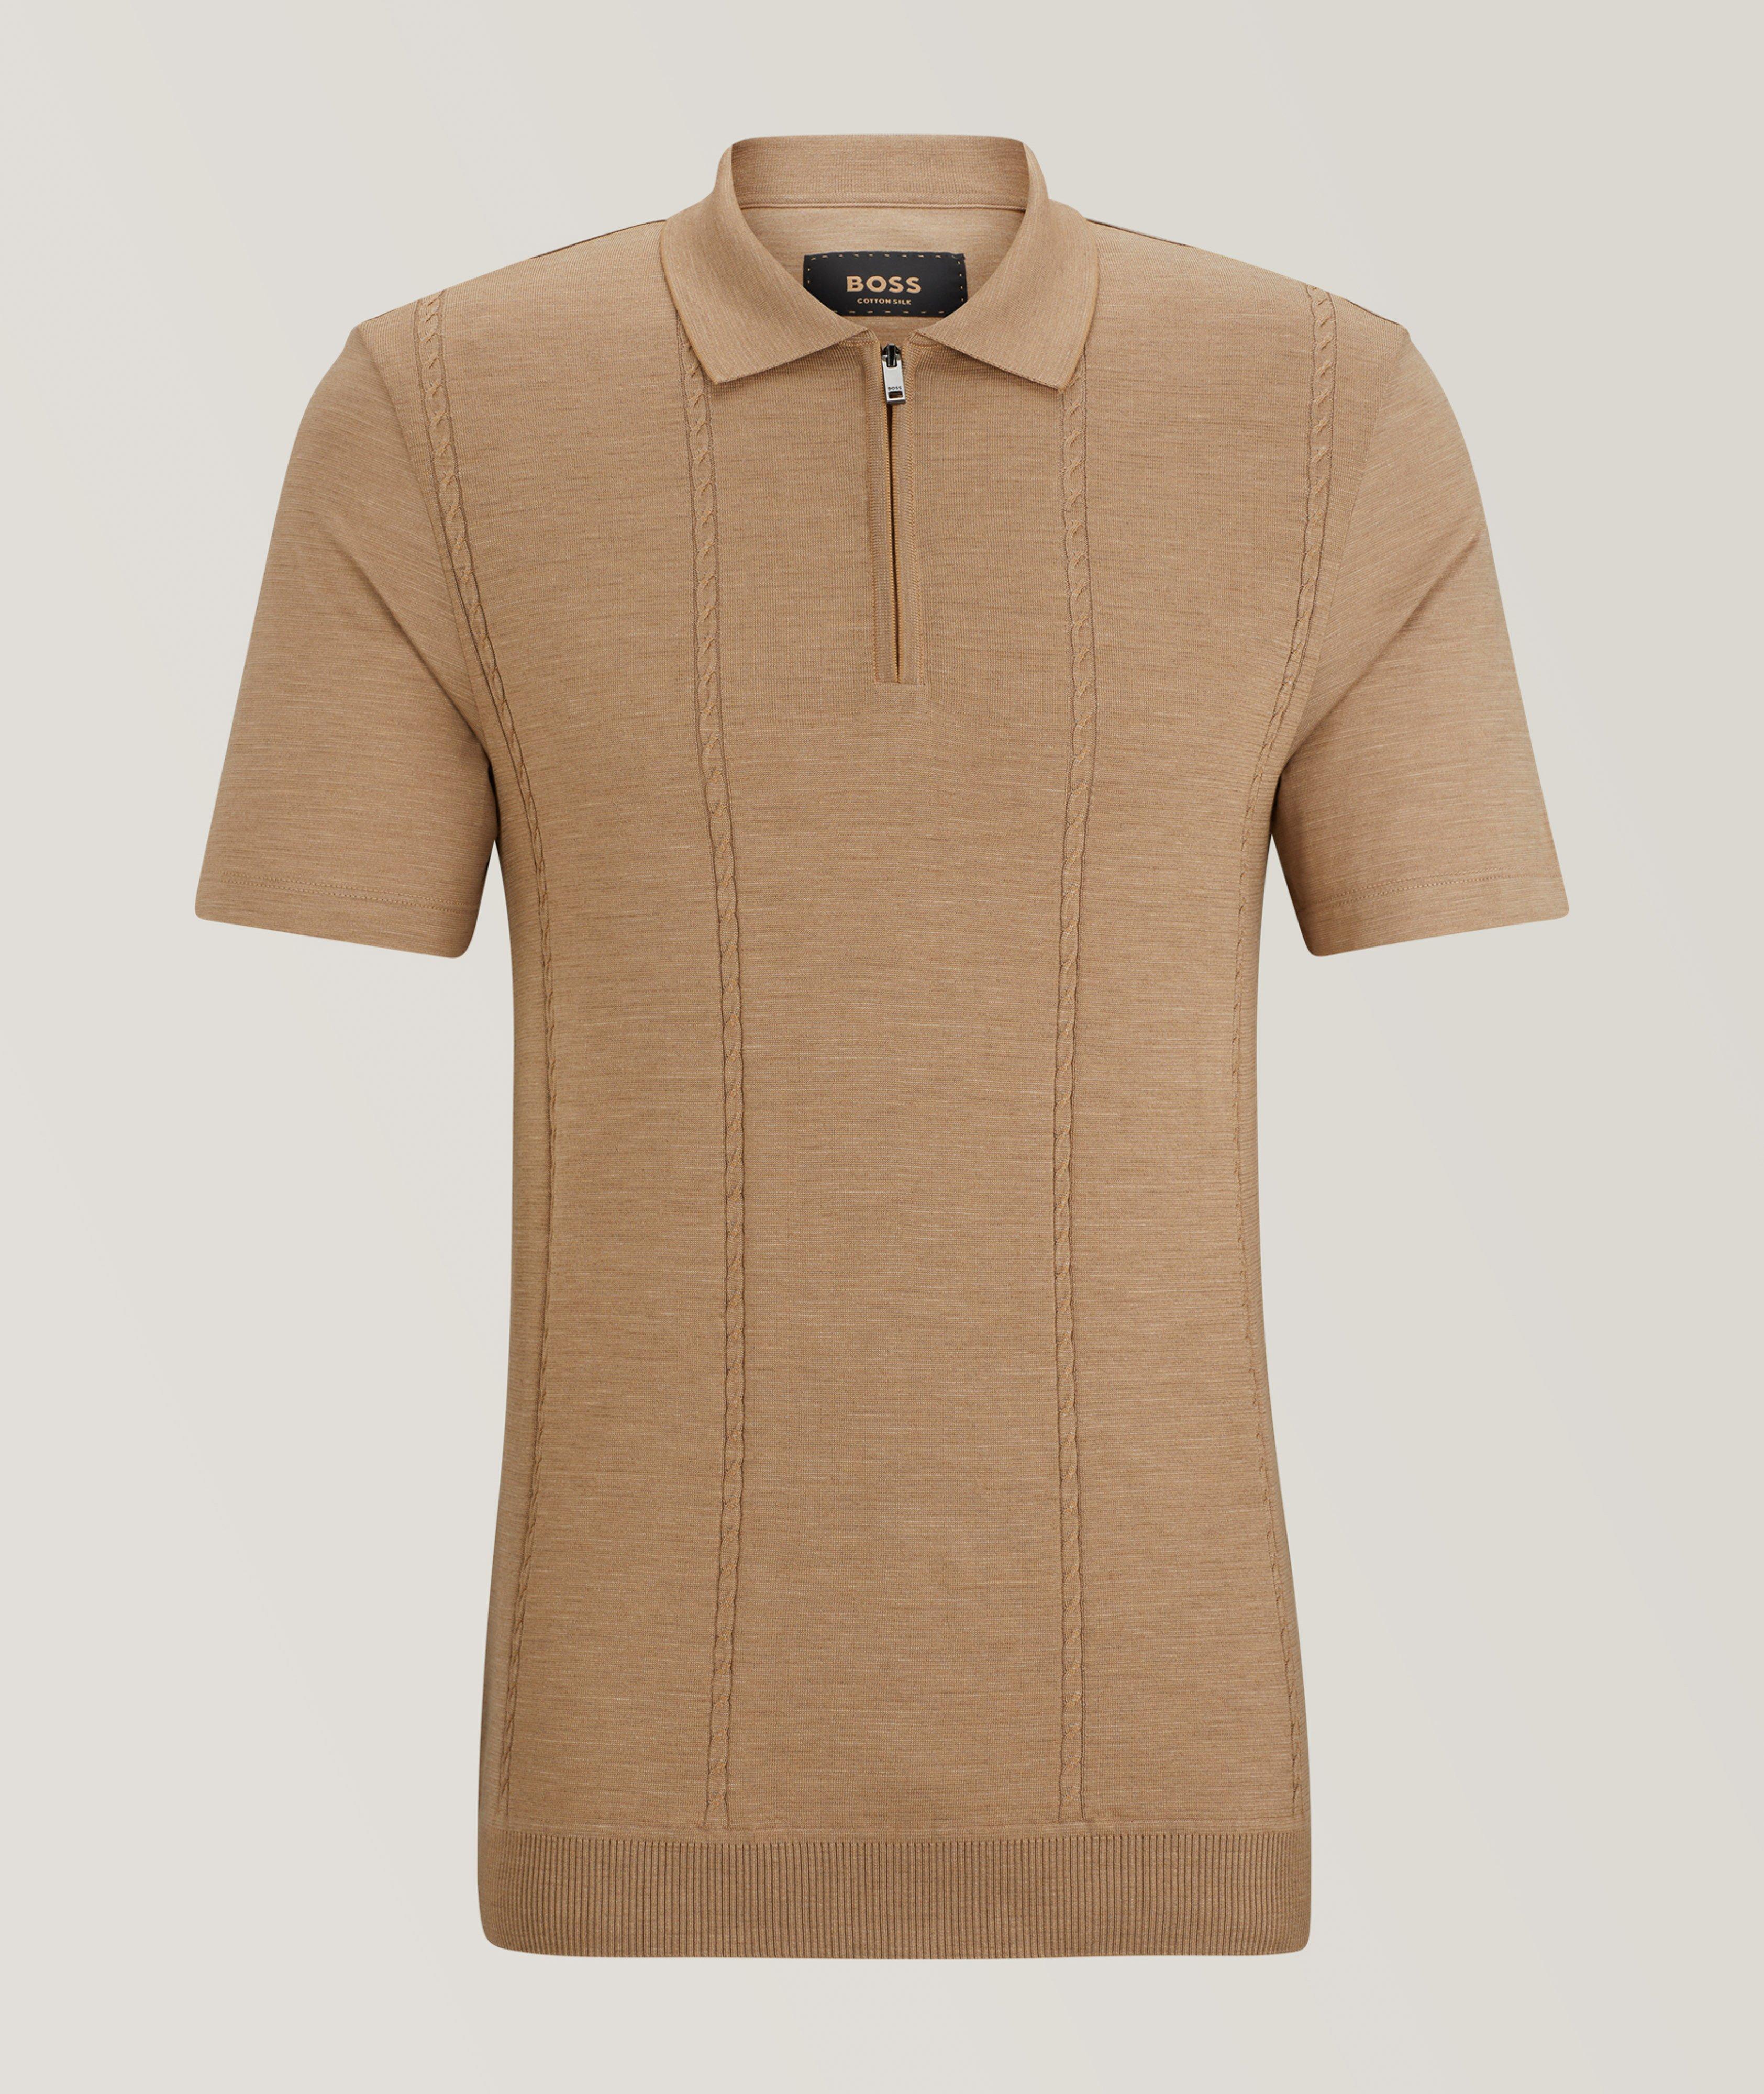 Knitted Jacquard Silk-Cotton Polo image 0